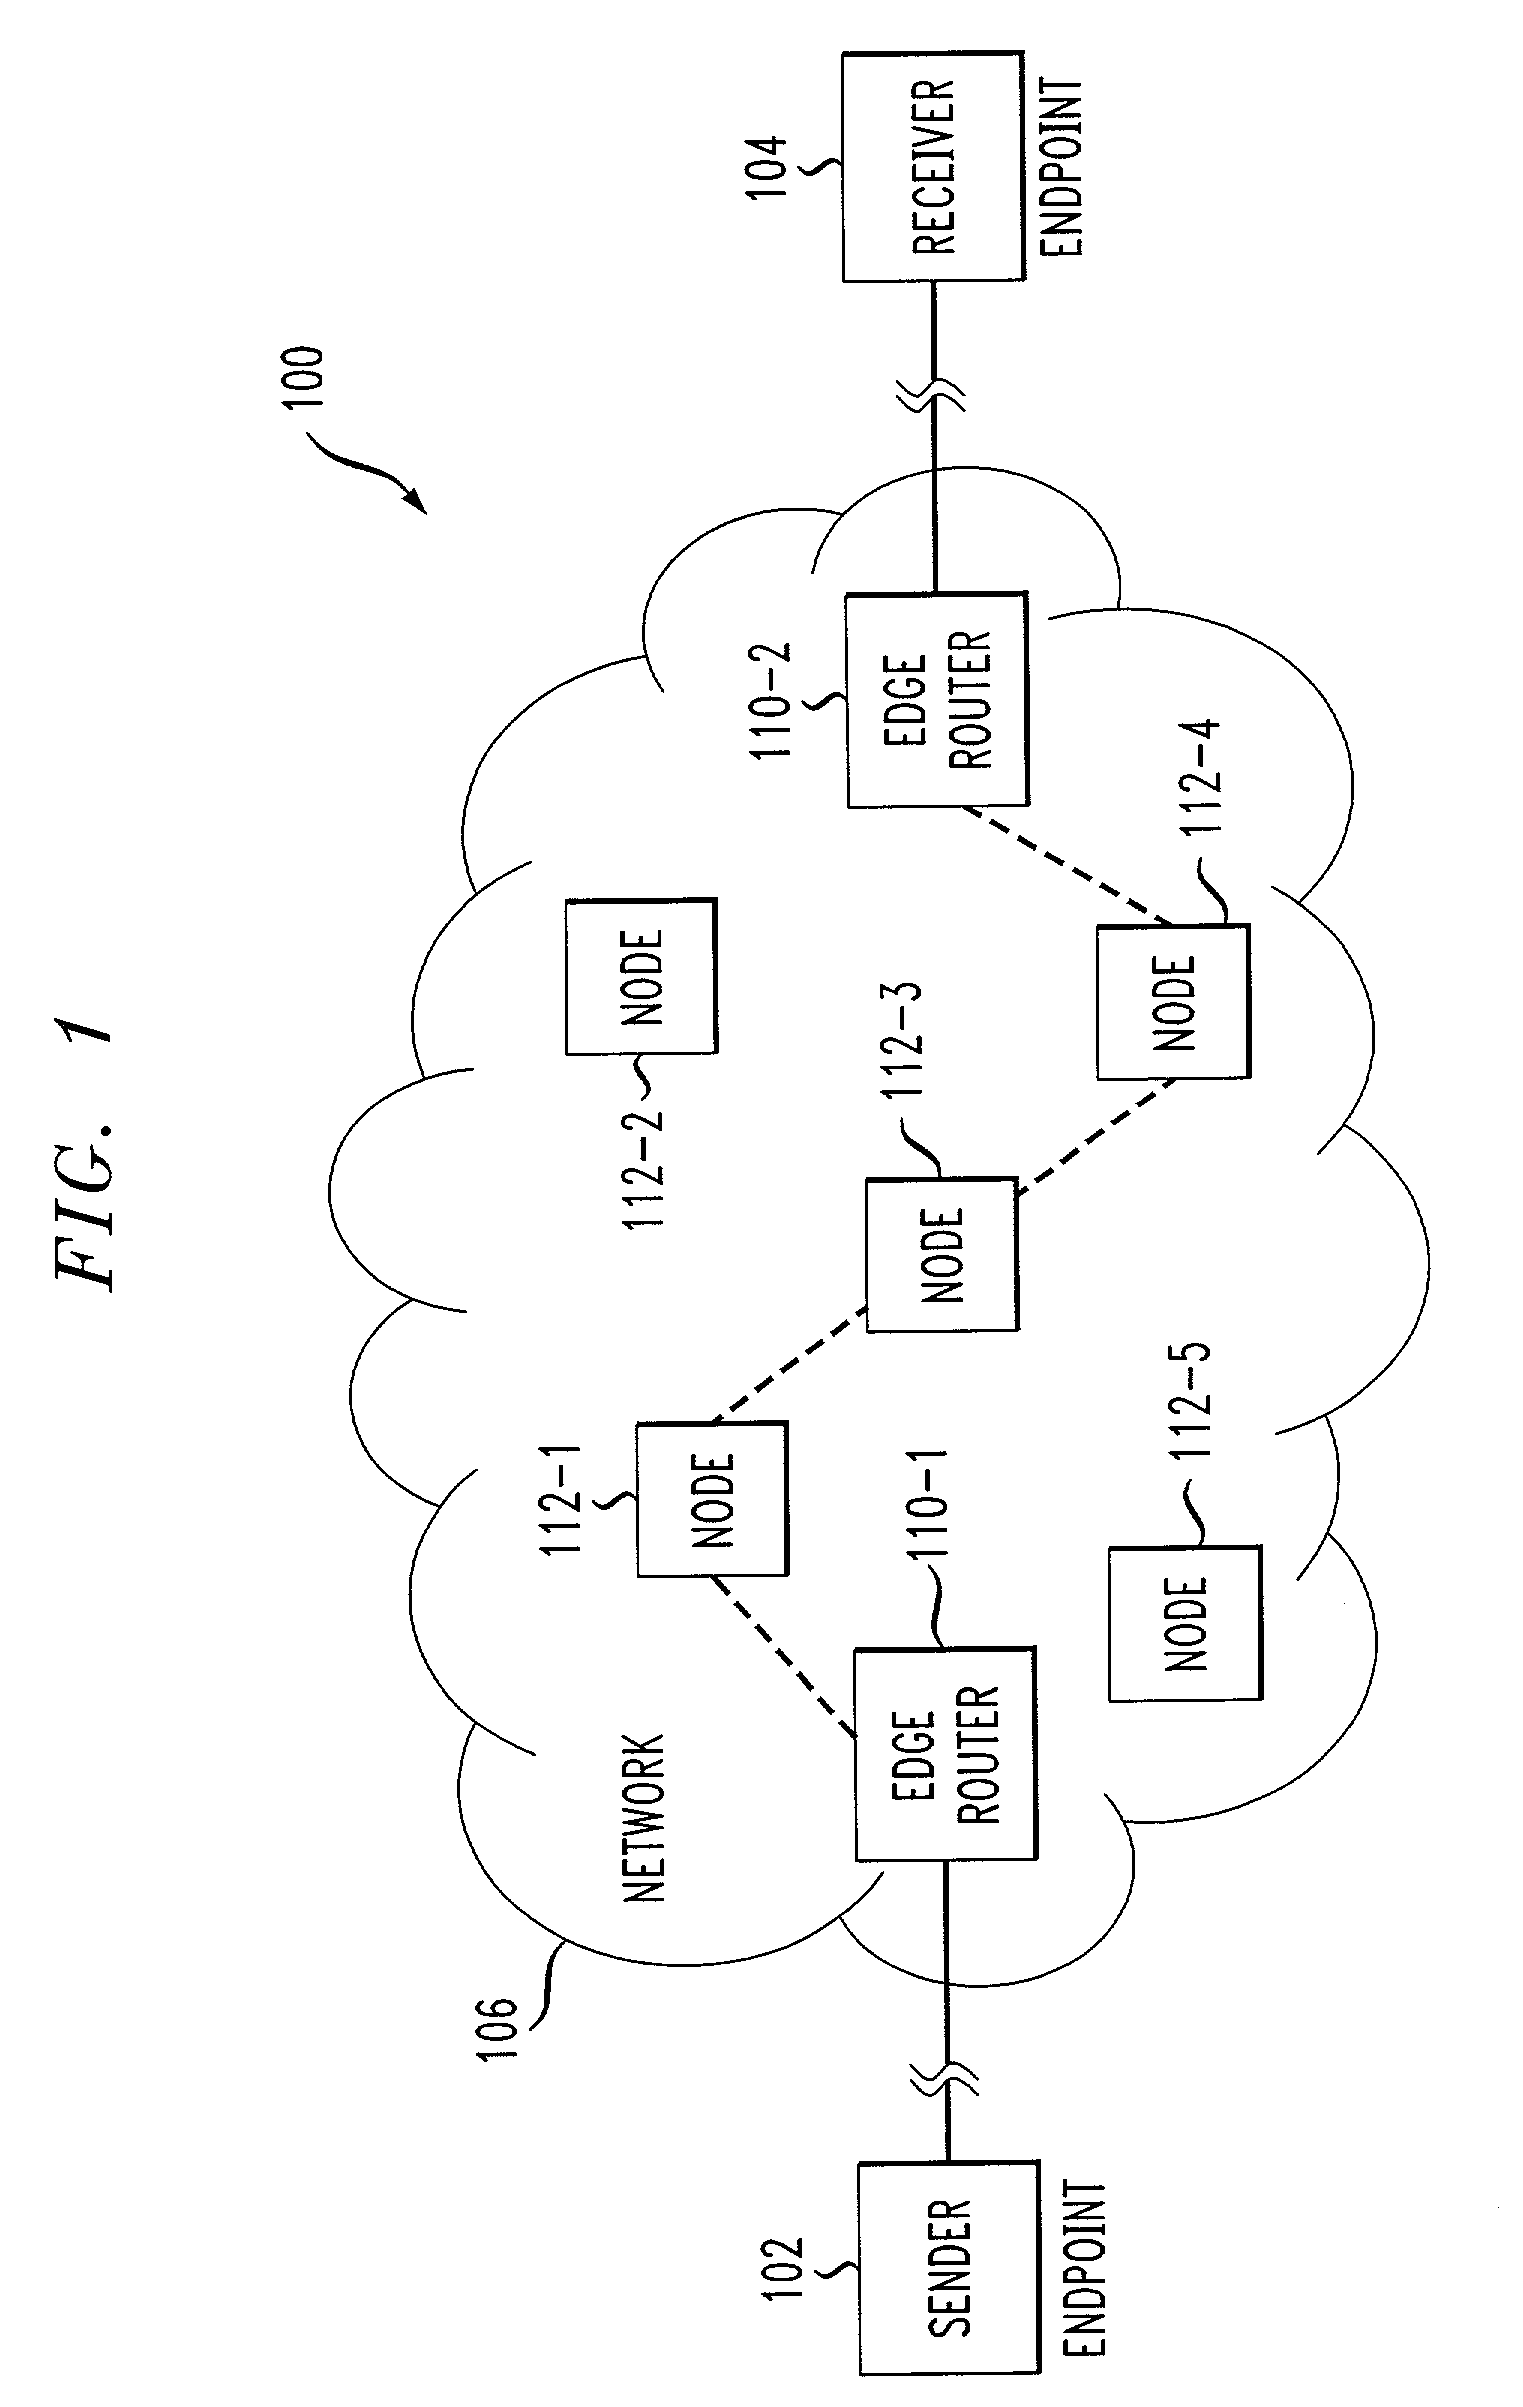 Method and apparatus for policy and admission control in packet-based communication systems